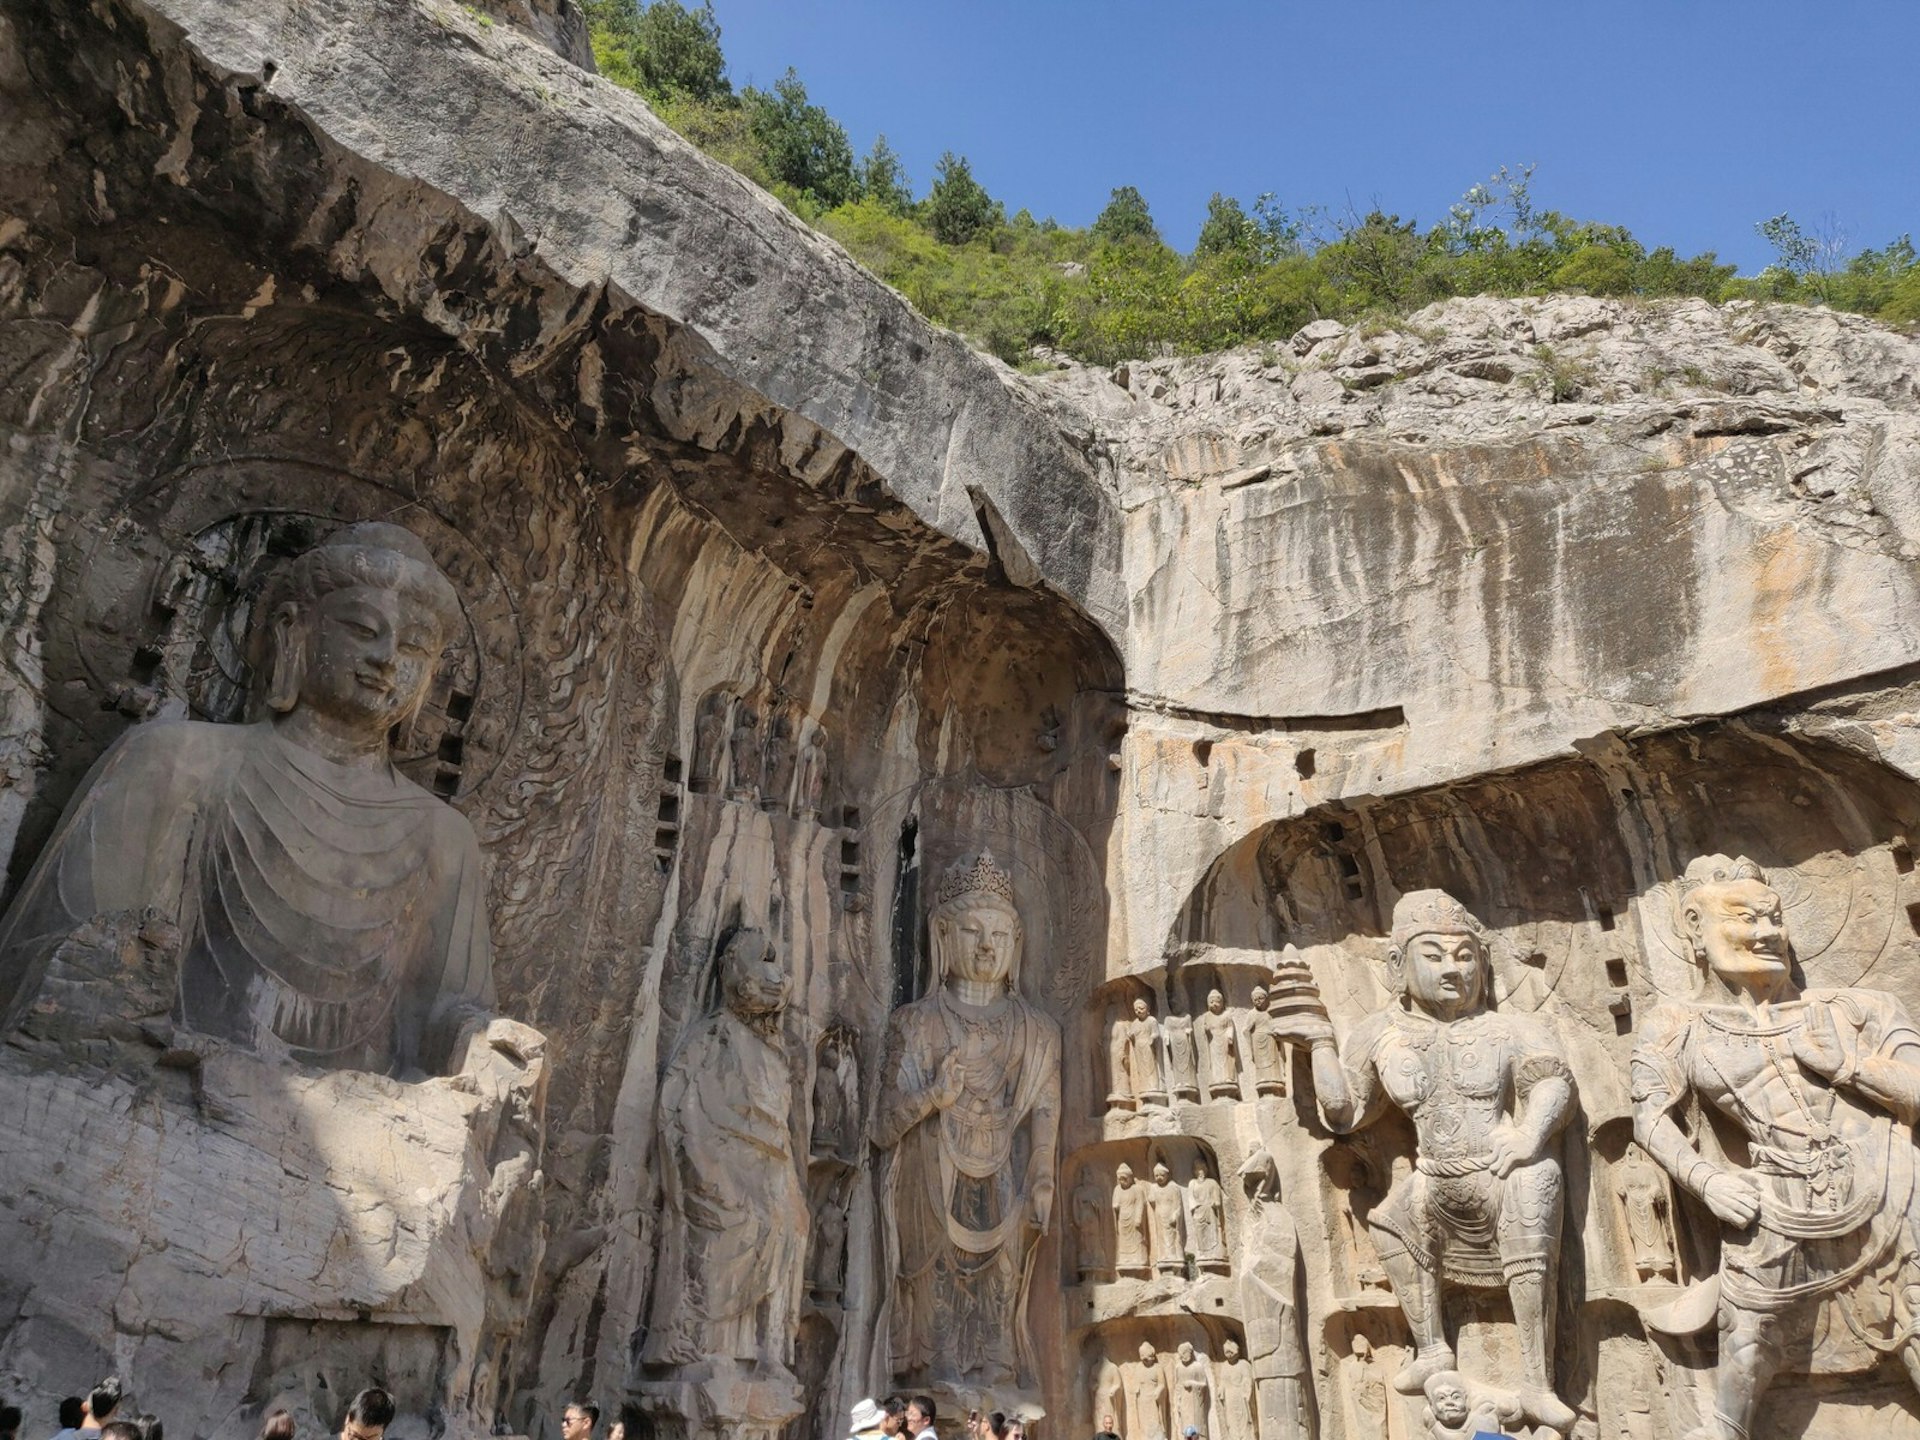 5 ornate Buddhas and guardians are carved into a grey stone cliffside cave